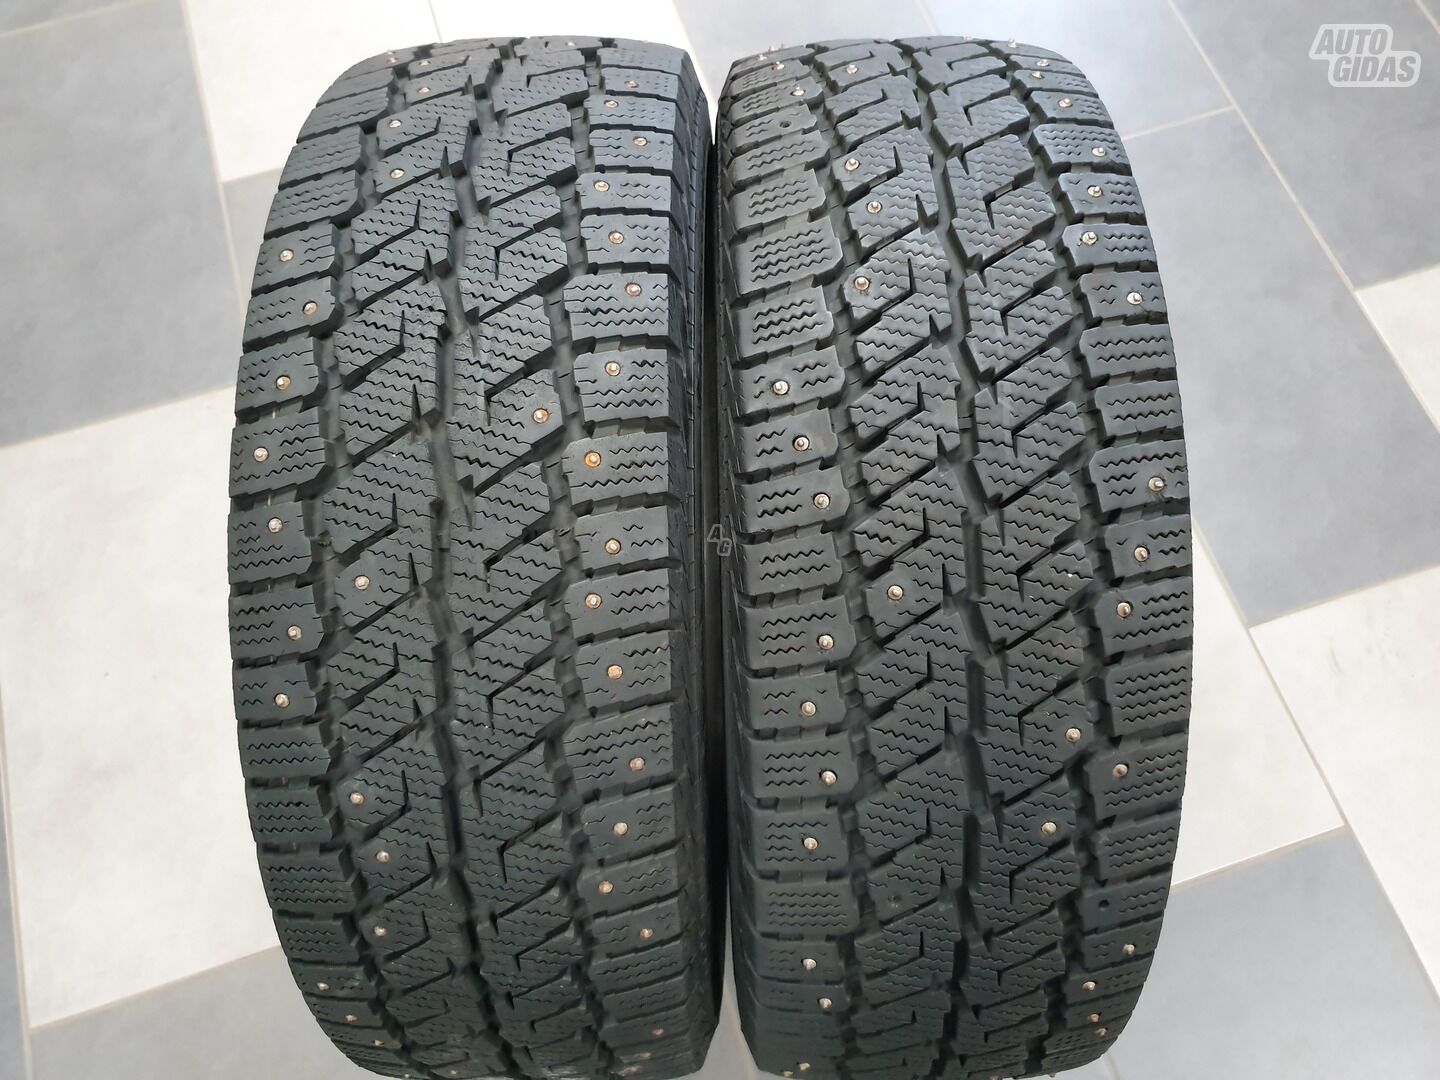 Continental P398 ContiIceContact R17C winter tyres minivans